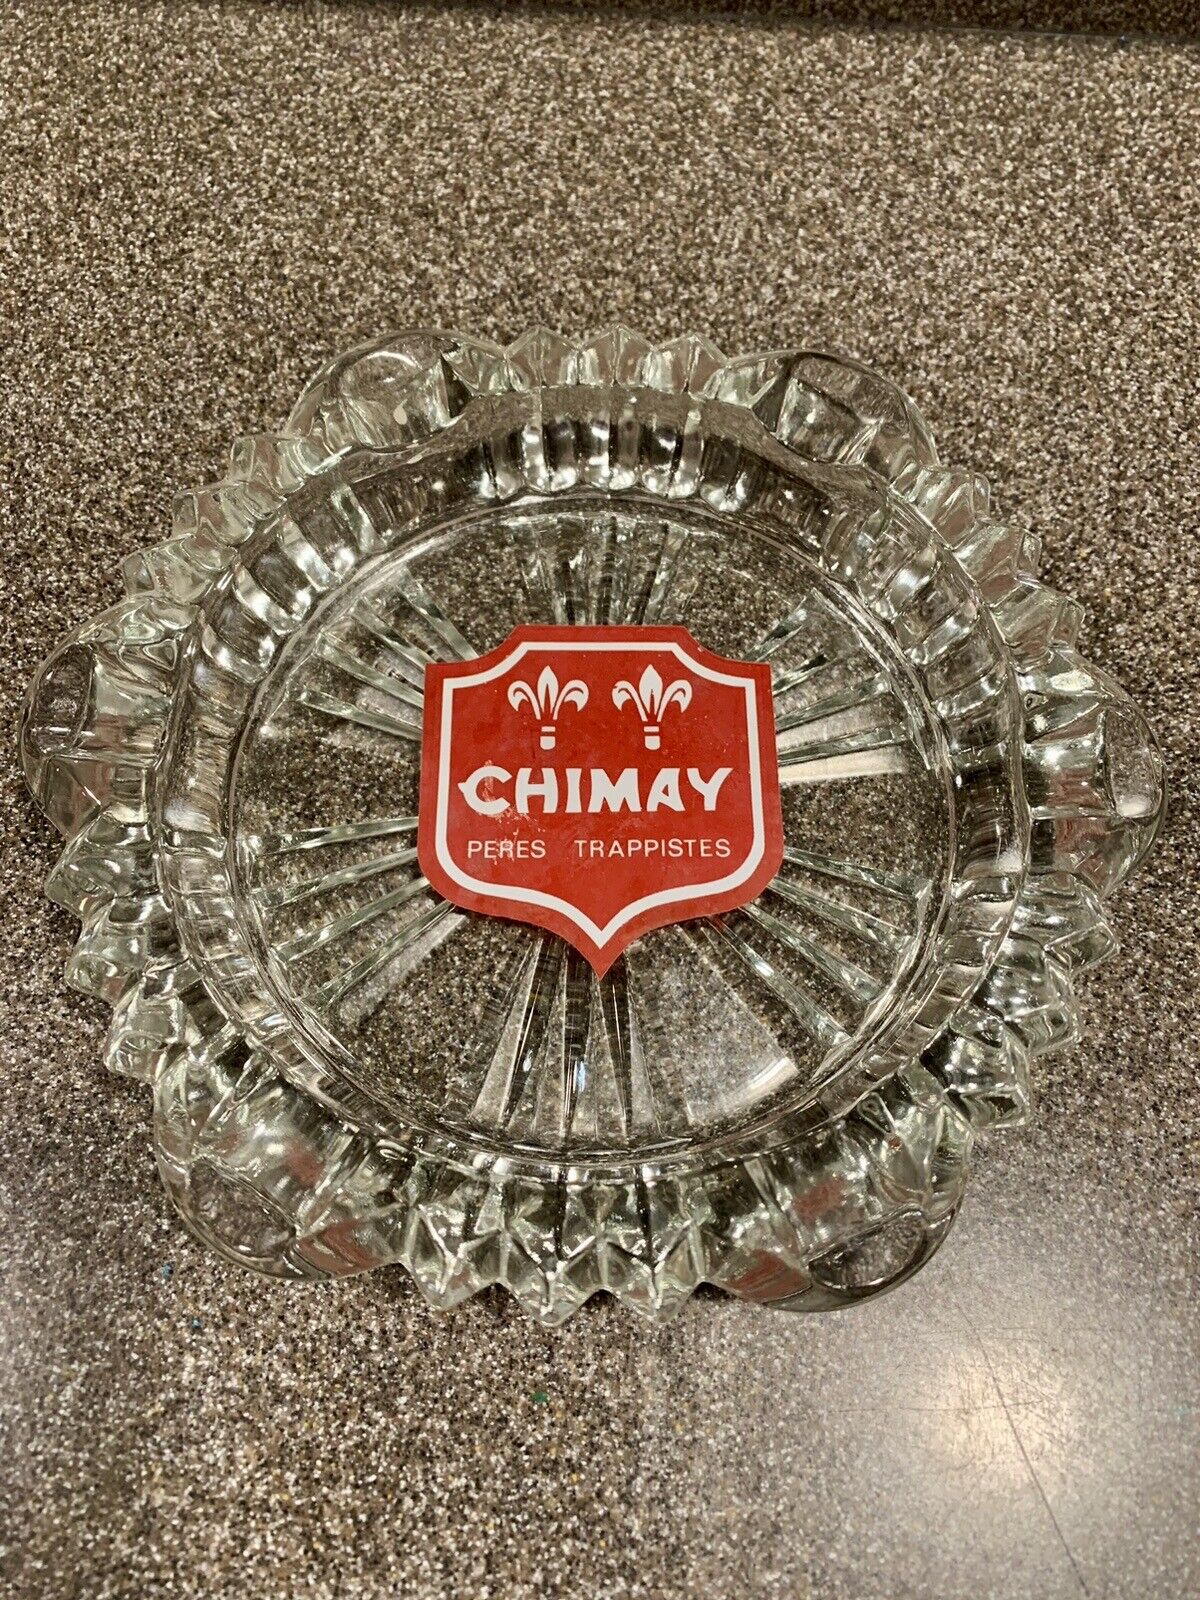 CHIMAY Peres Trappistes Belgian Brewery Clear Glass Ashtray Tobacciana